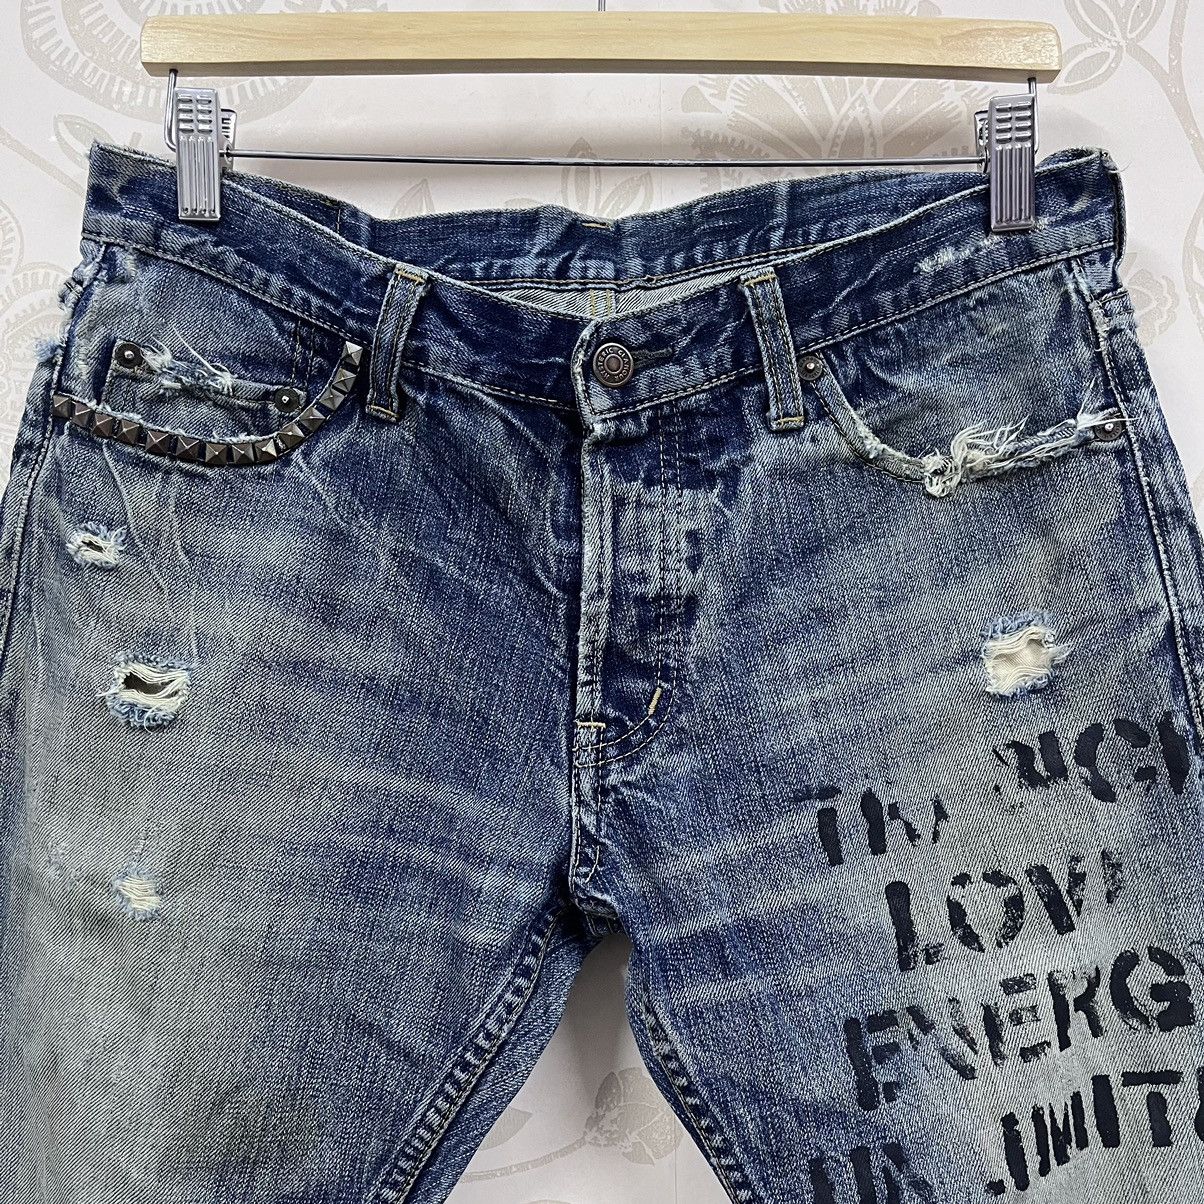 Vintage Hysteric Glamour Thee Hysteric XXX Distressed Denim - 21